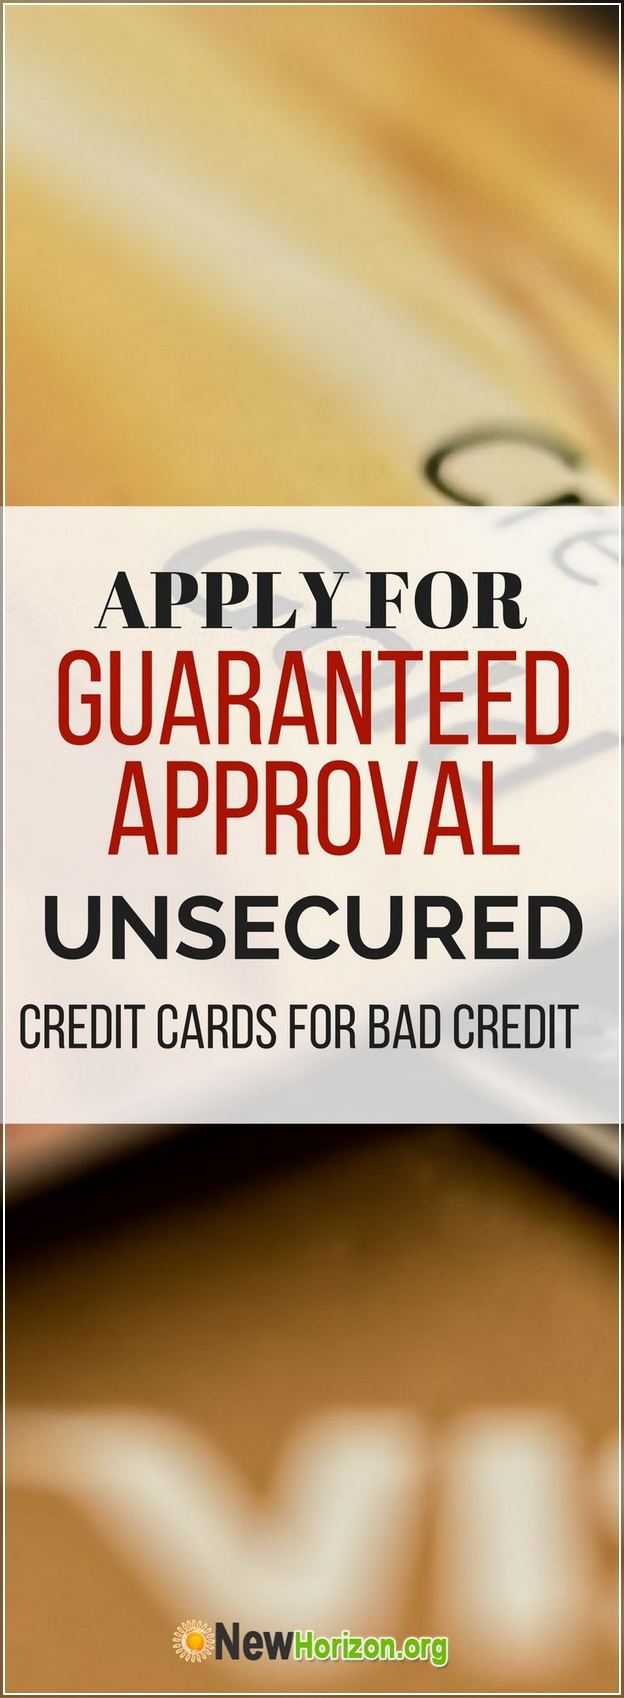 Unsecured Credit Cards For Bad Credit Guaranteed Approval